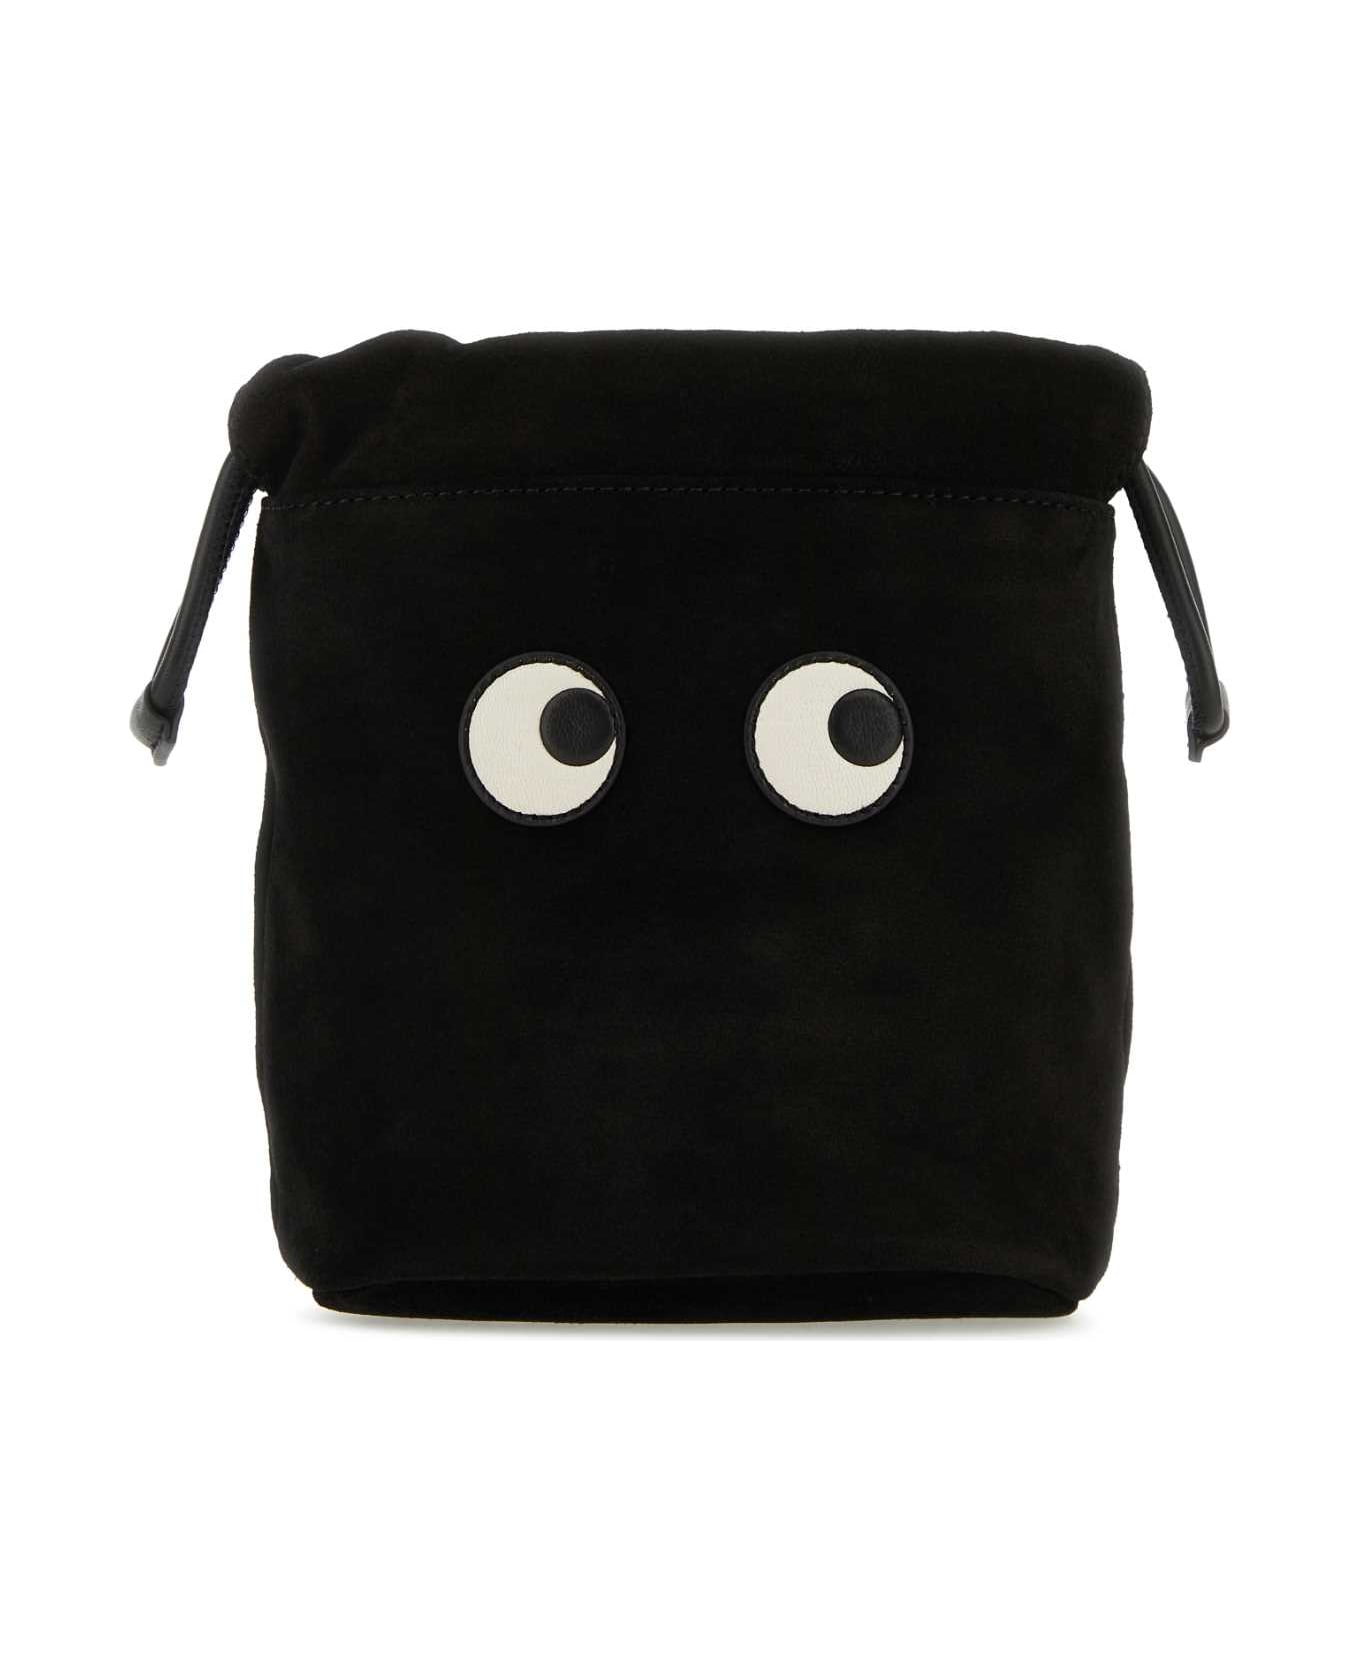 Anya Hindmarch Black Suede Pouch - BLACK ショルダーバッグ